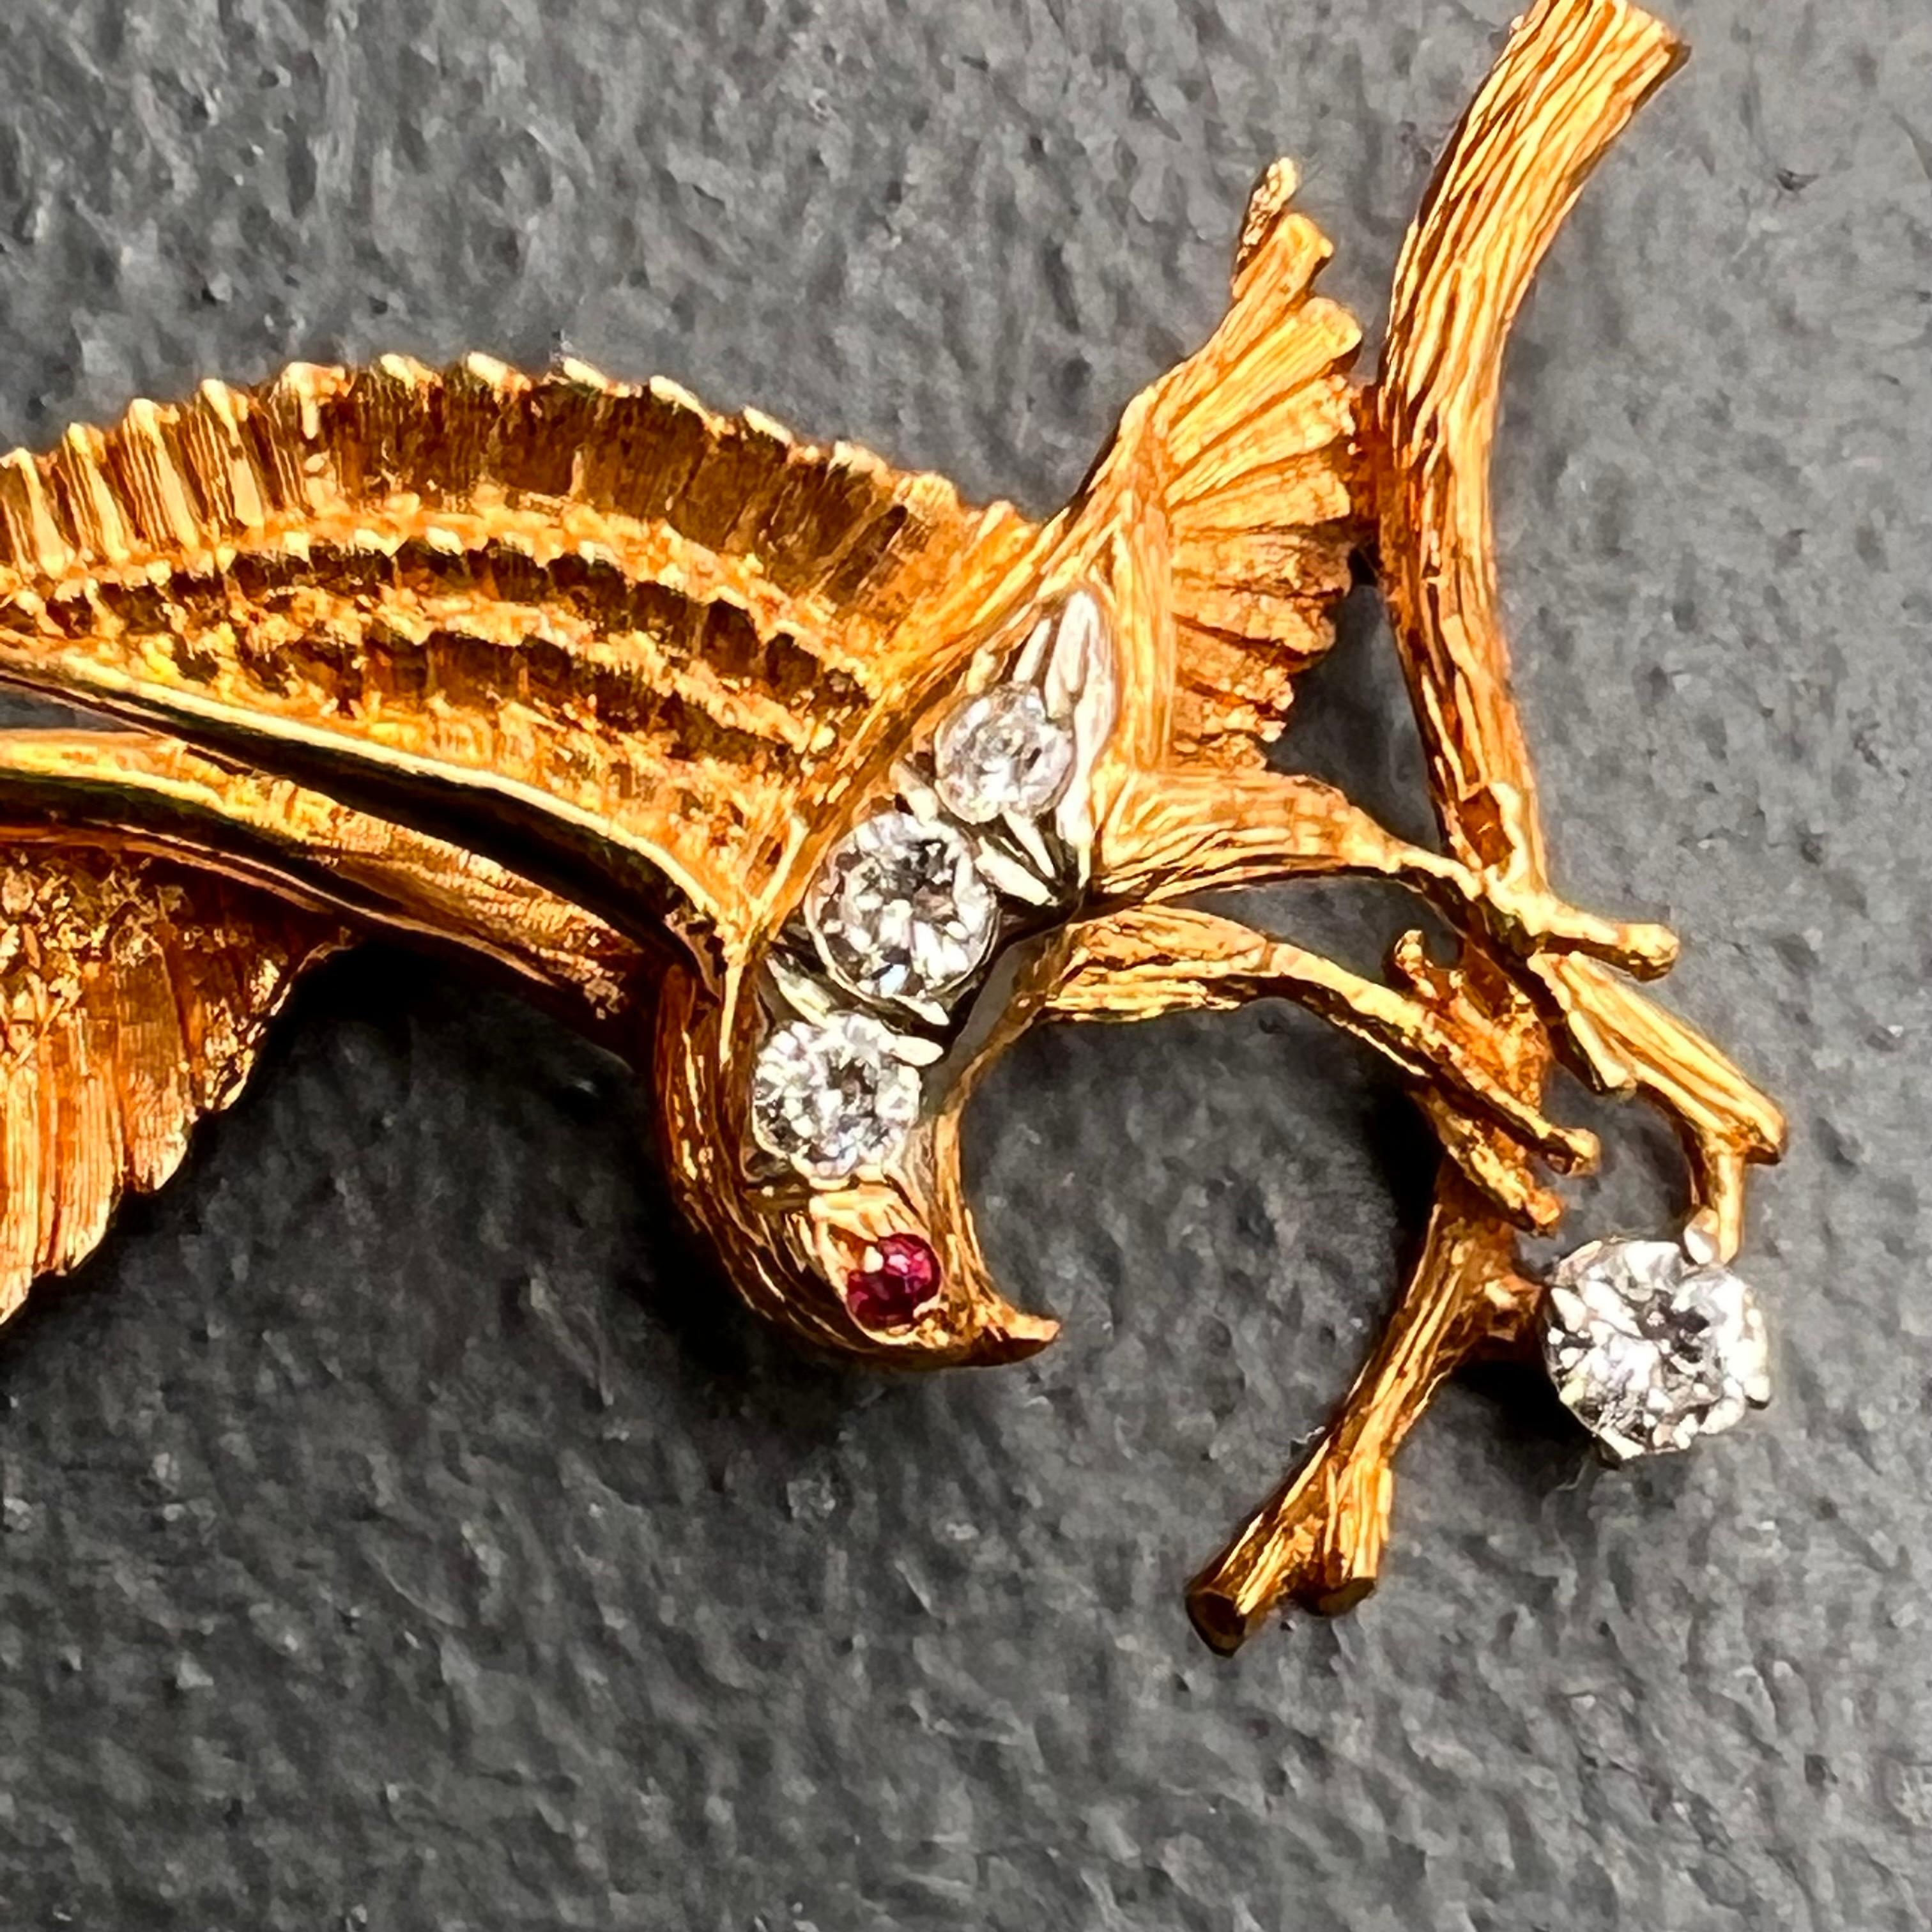 Diamond 18 Karat Gold American Bald Eagle Pin with Ruby Eyes In Good Condition For Sale In Plainsboro, NJ